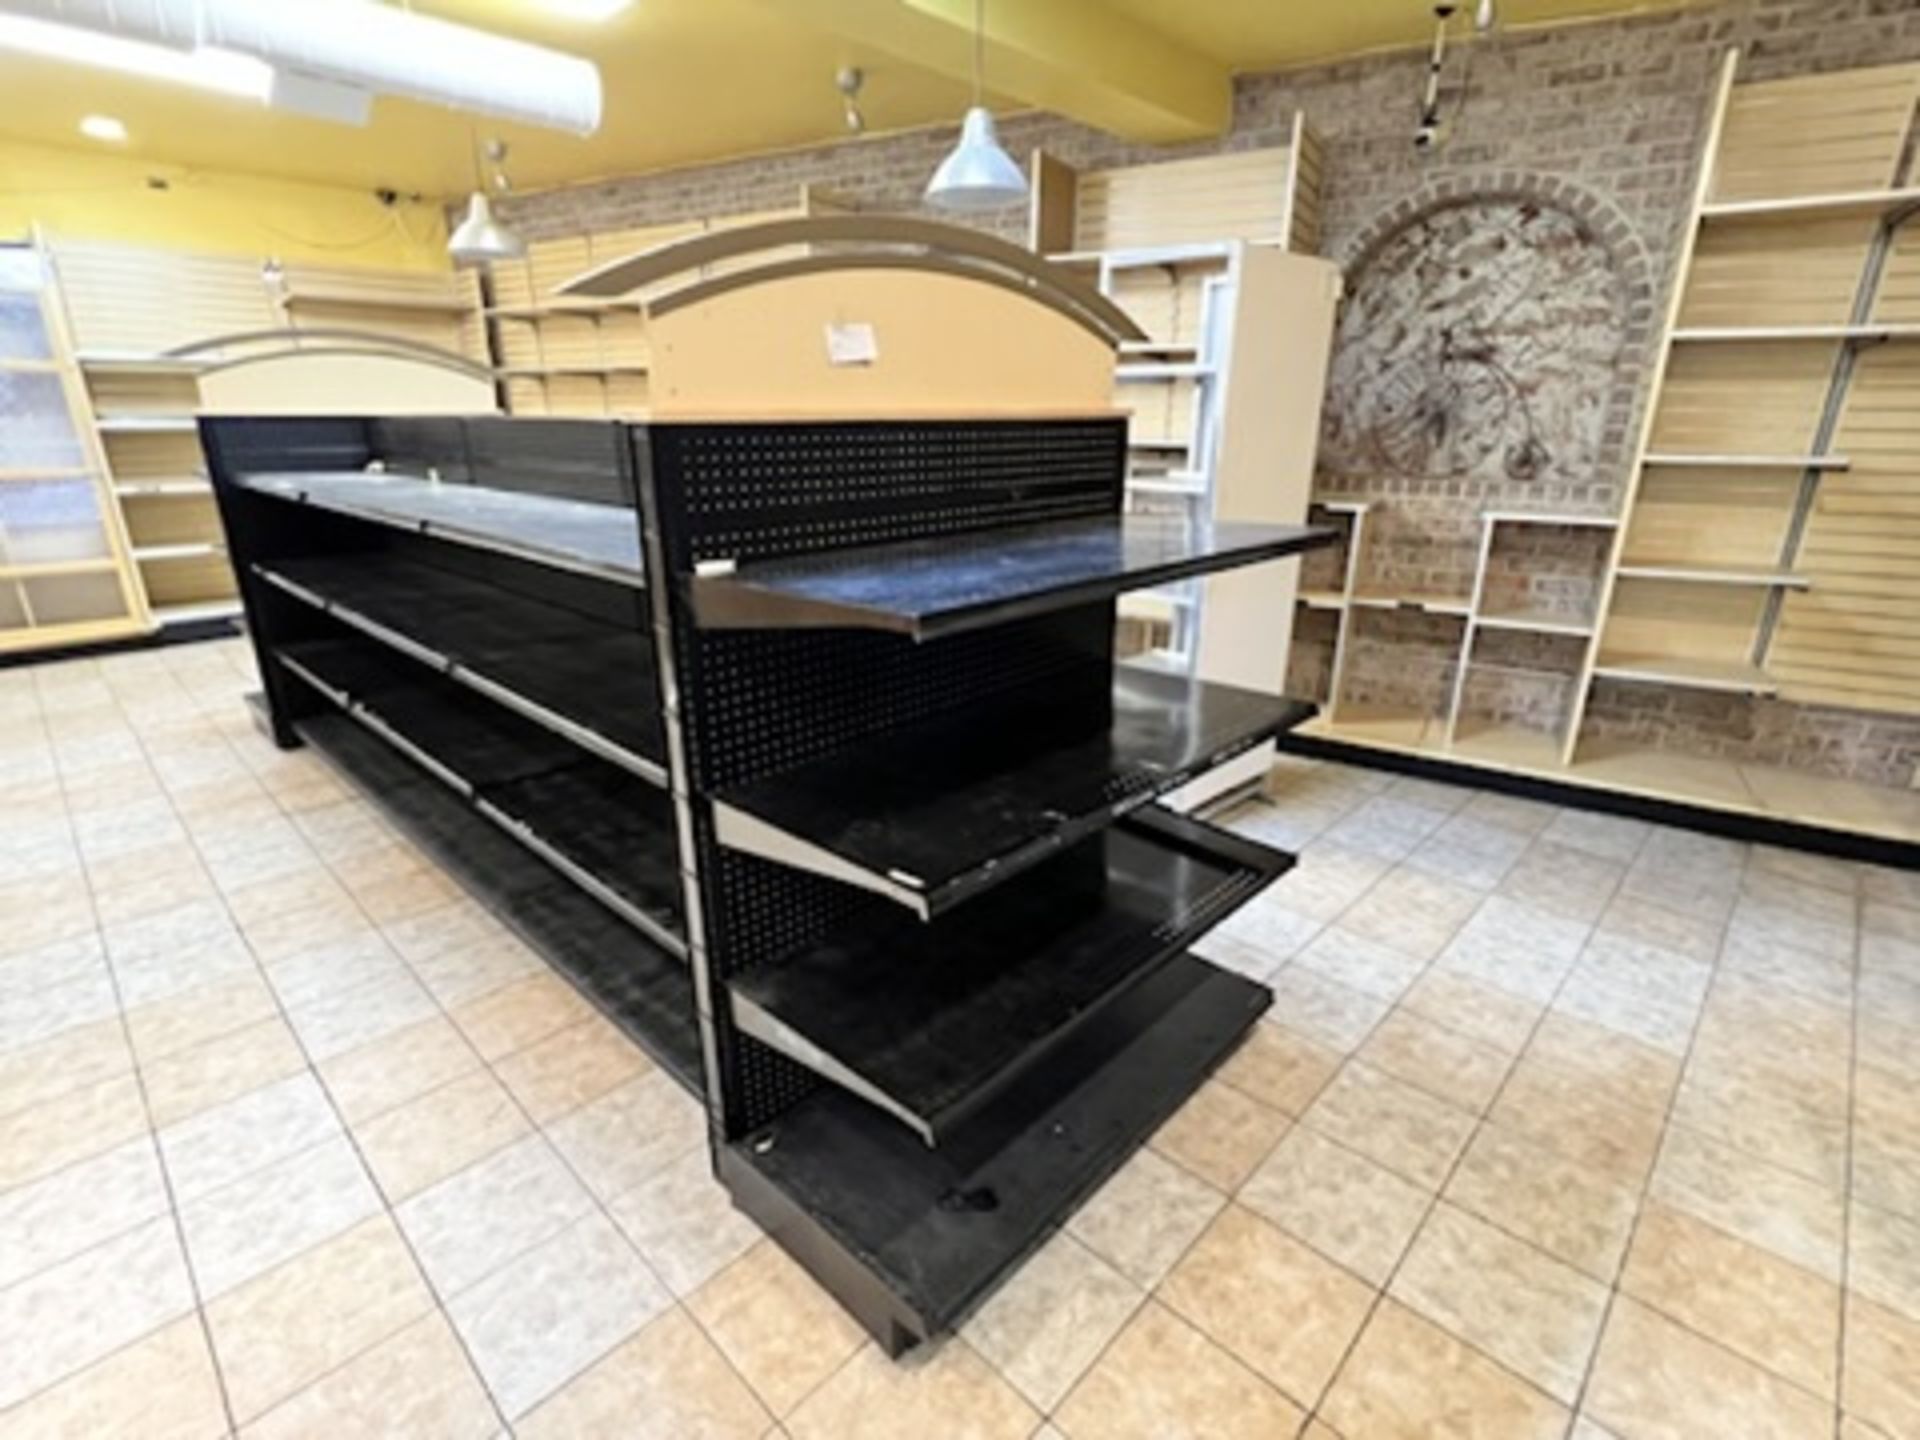 8 Section adjustable Gondola shelving system Approximately 195” Long X 50” Wide with 2 archways o